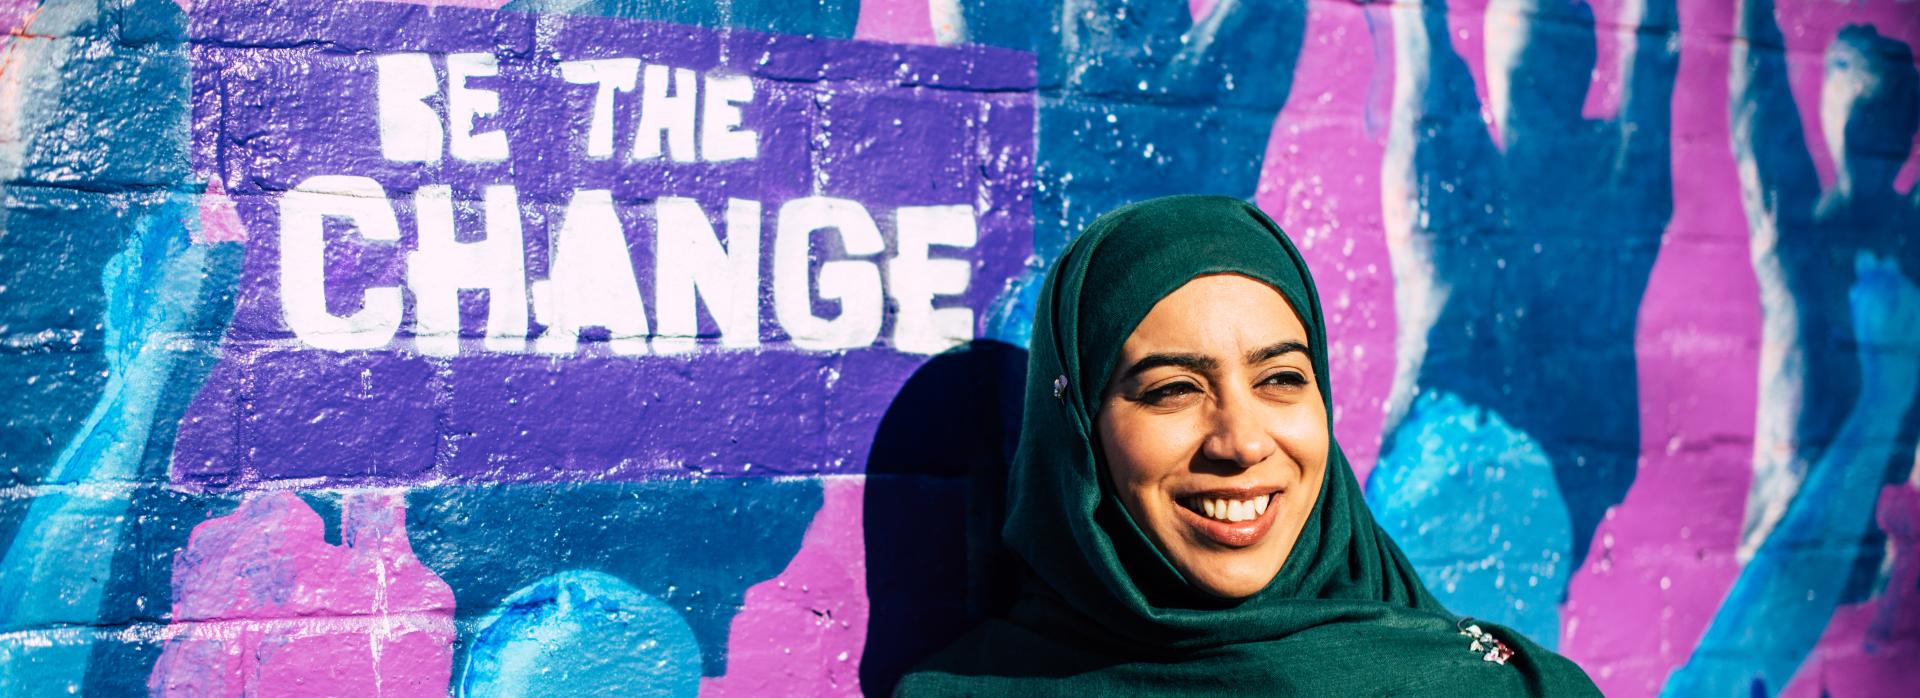 A South Asian woman wearing a dark green coloured headscarf, smiling slightly away from the camera, standing in front of a colourful graffiti wall mural with the words "Be the change" 